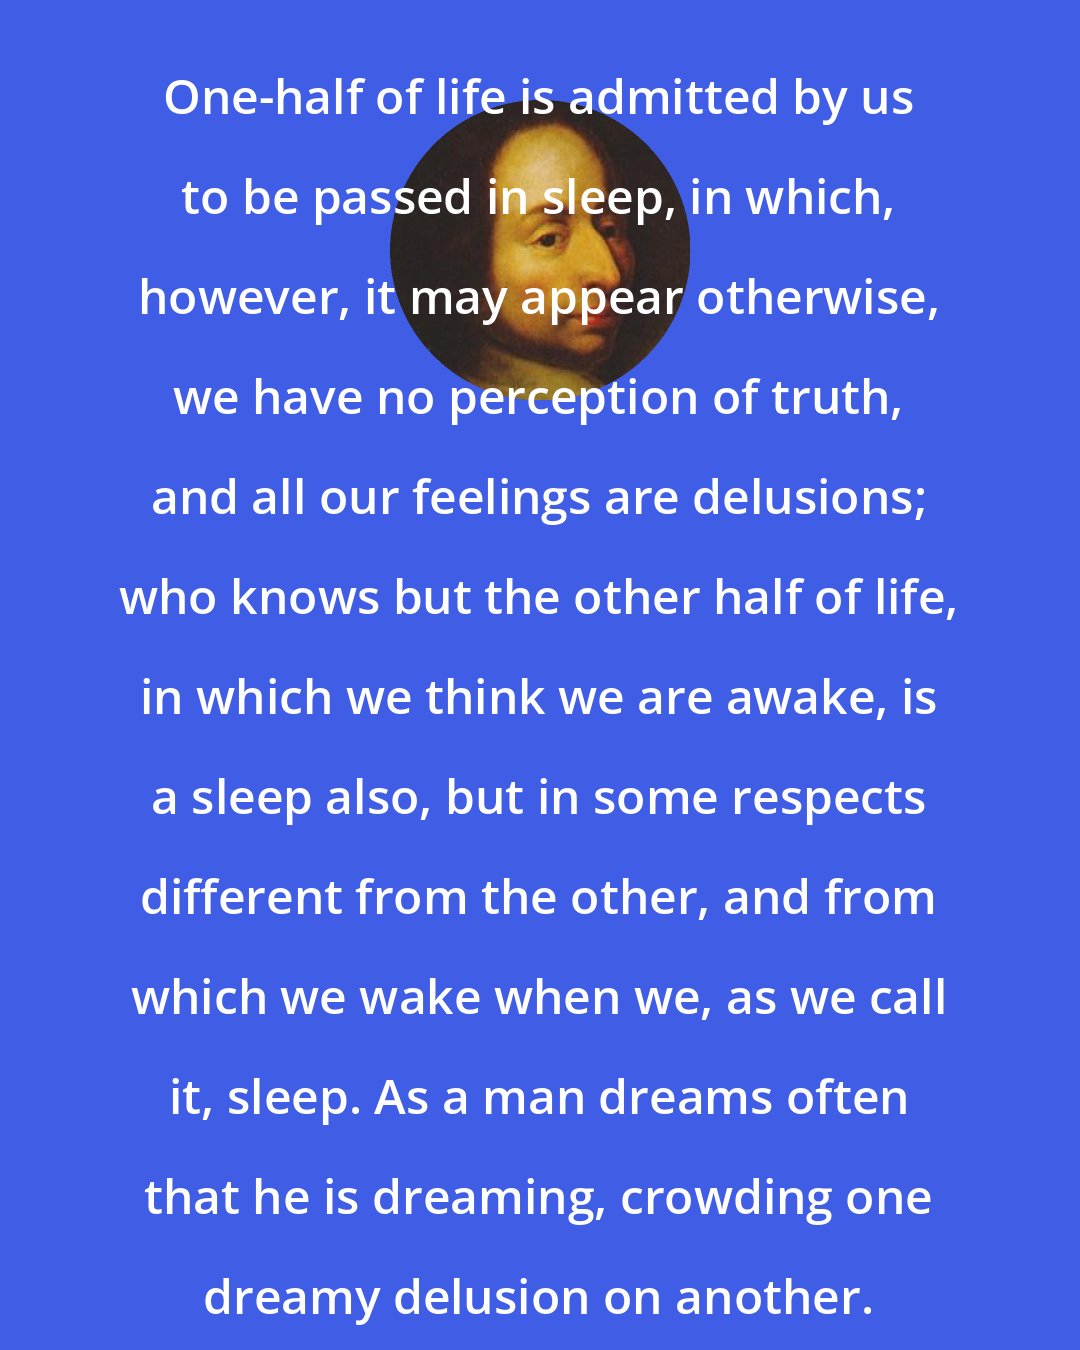 Blaise Pascal: One-half of life is admitted by us to be passed in sleep, in which, however, it may appear otherwise, we have no perception of truth, and all our feelings are delusions; who knows but the other half of life, in which we think we are awake, is a sleep also, but in some respects different from the other, and from which we wake when we, as we call it, sleep. As a man dreams often that he is dreaming, crowding one dreamy delusion on another.